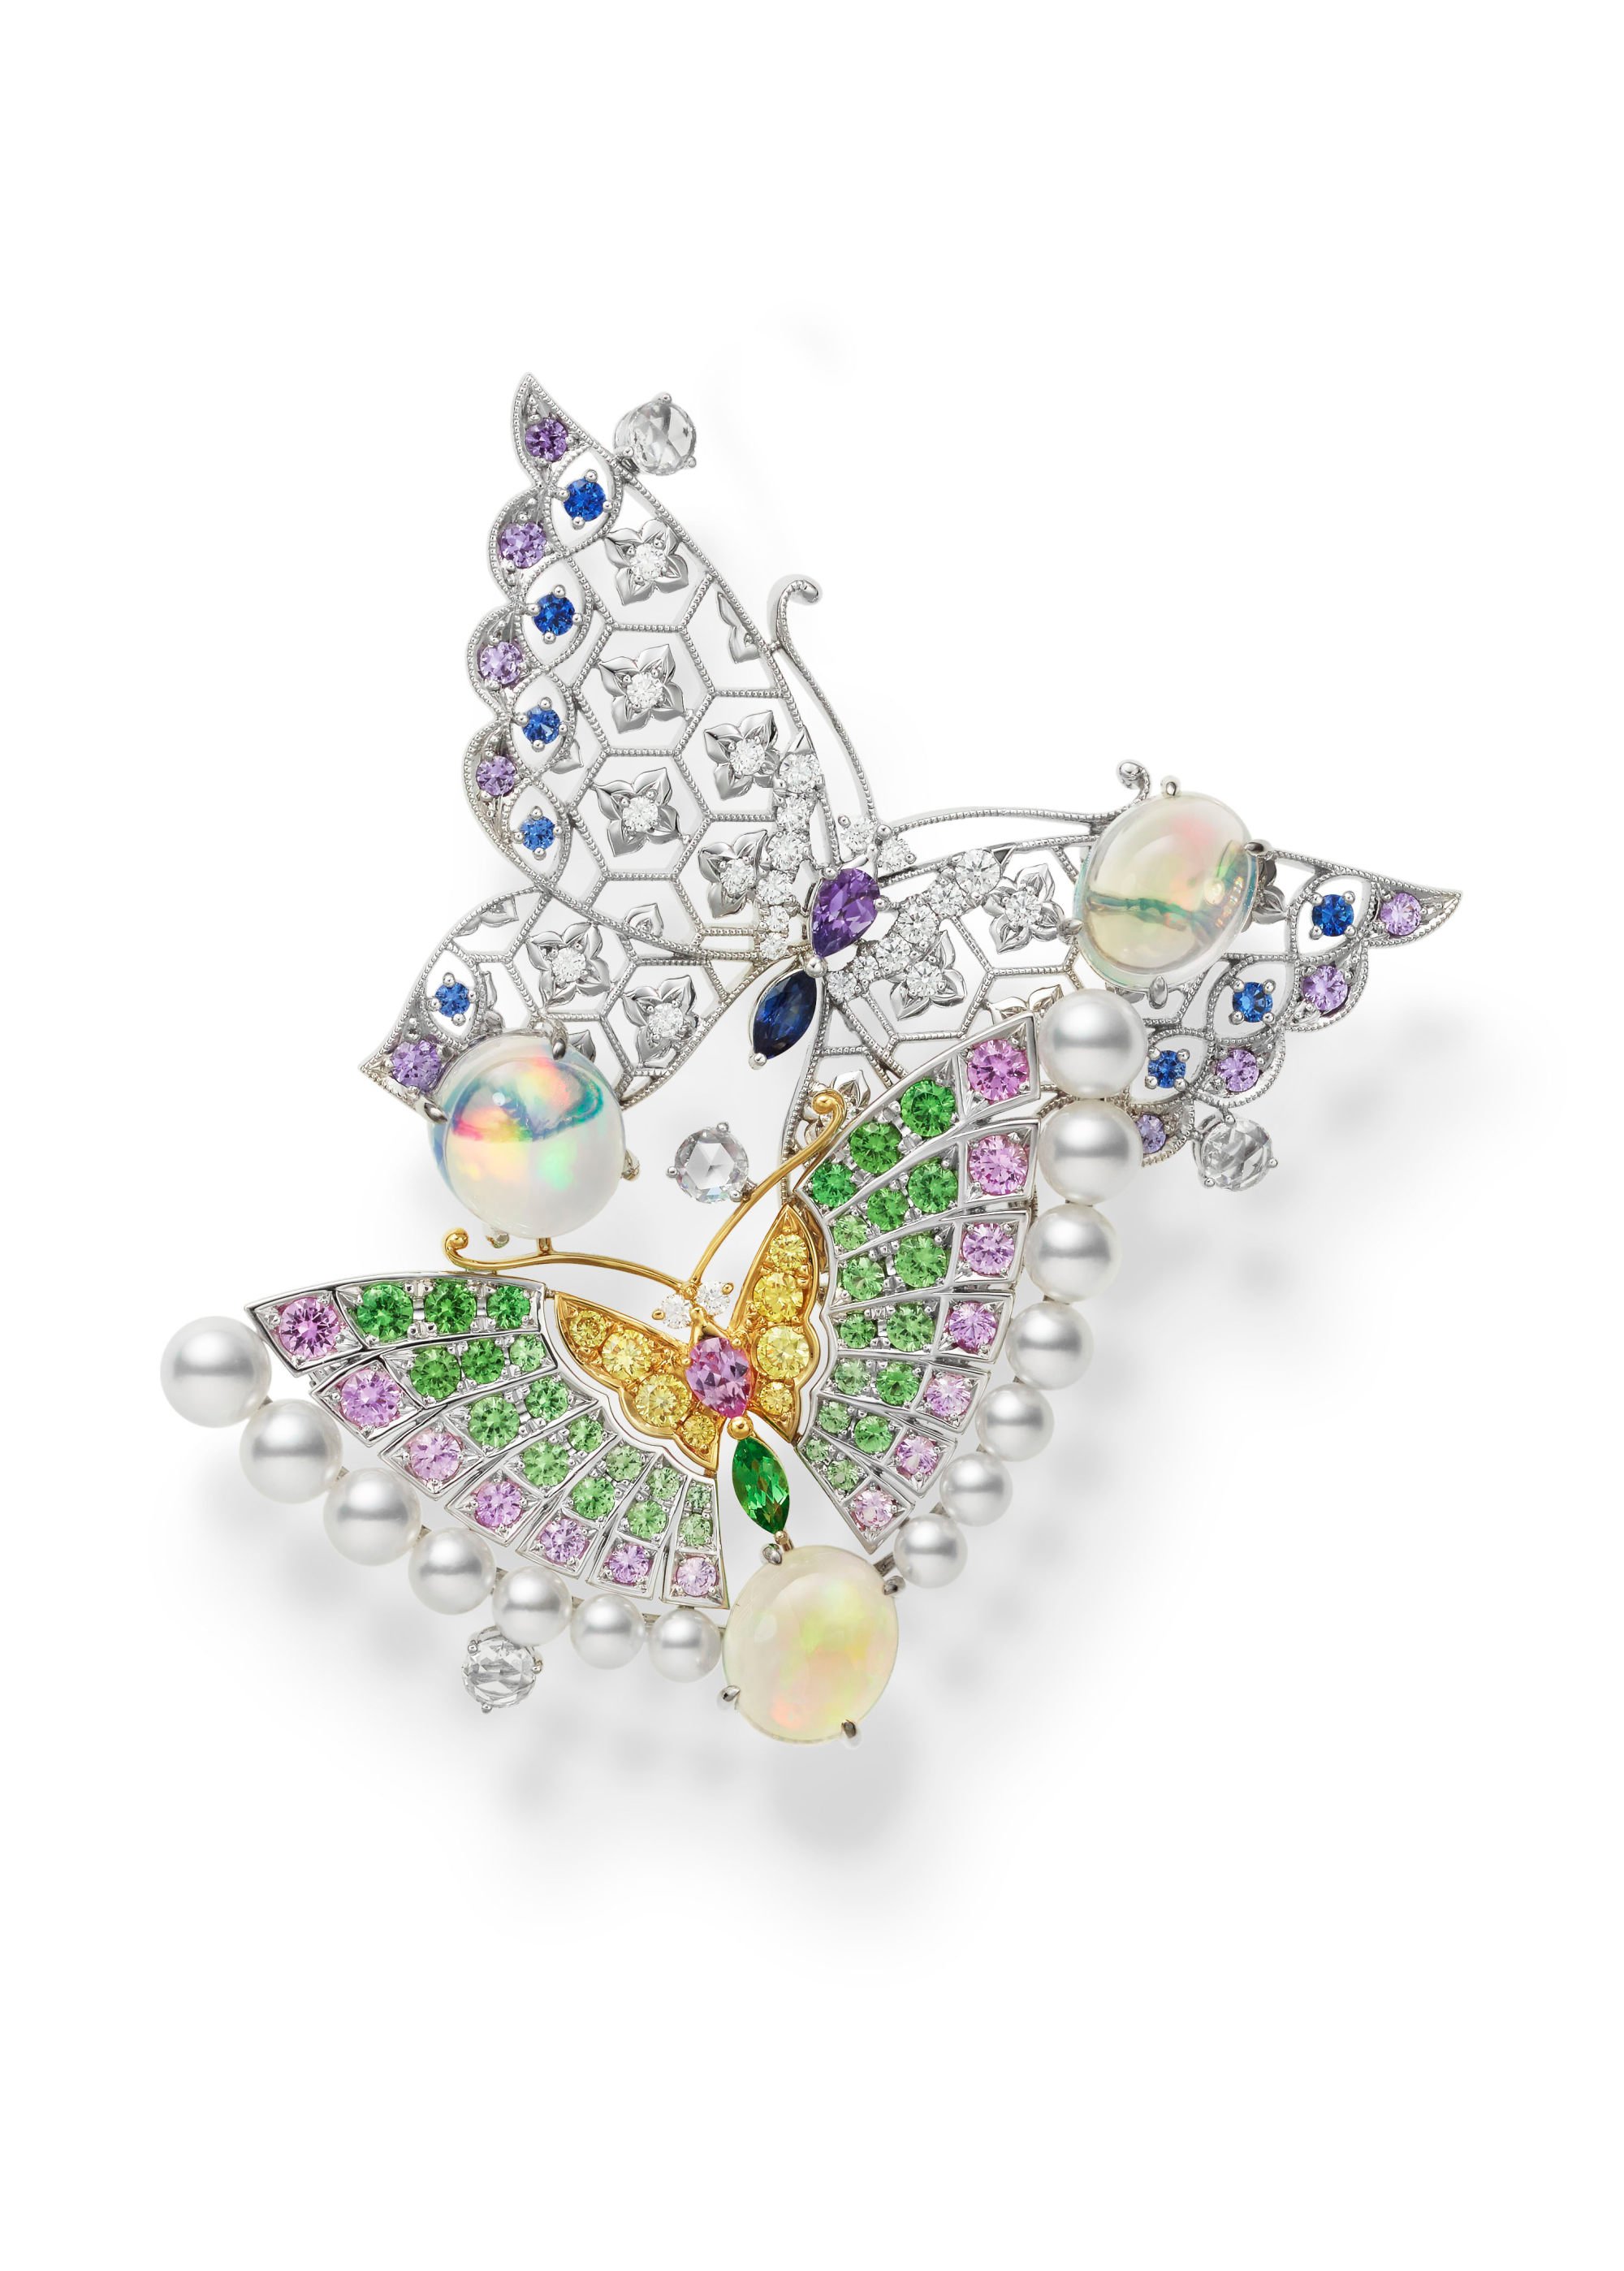 Gucci, Chopard and Dior: 5 high jewellery collections to watch in